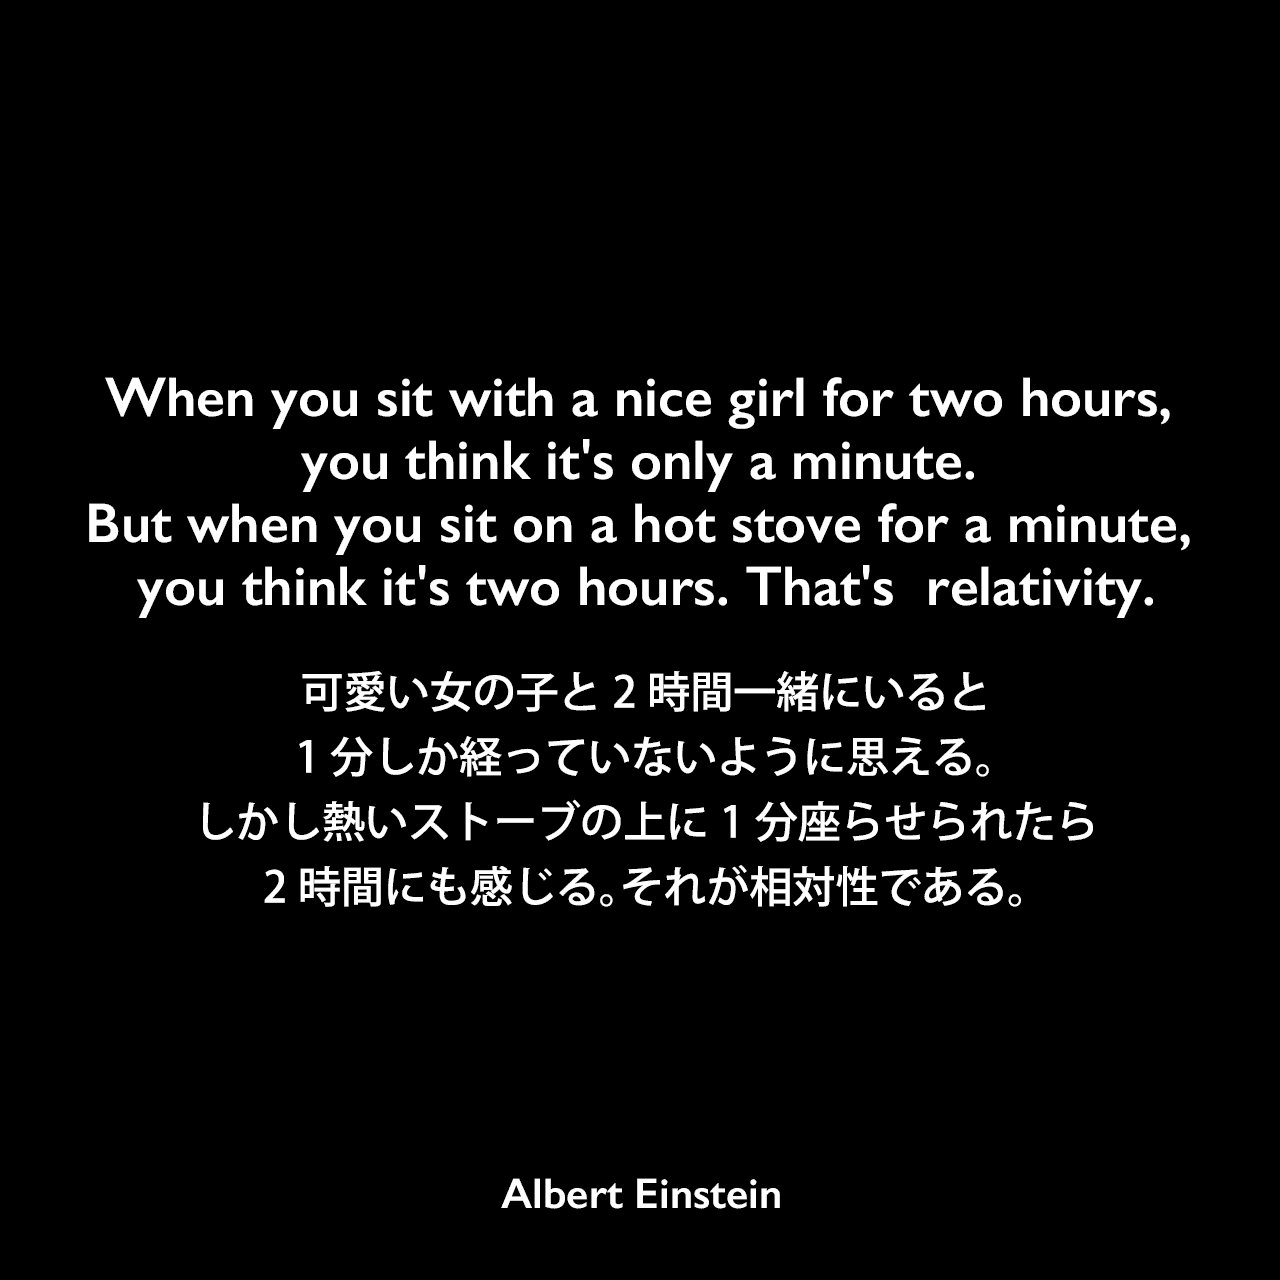 When you sit with a nice girl for two hours, you think it's only a minute. But when you sit on a hot stove for a minute, you think it's two hours. That's  relativity.可愛い女の子と2時間一緒にいると、1分しか経っていないように思える。しかし熱いストーブの上に1分座らせられたら、2時間にも感じる。それが相対性である。Albert Einstein